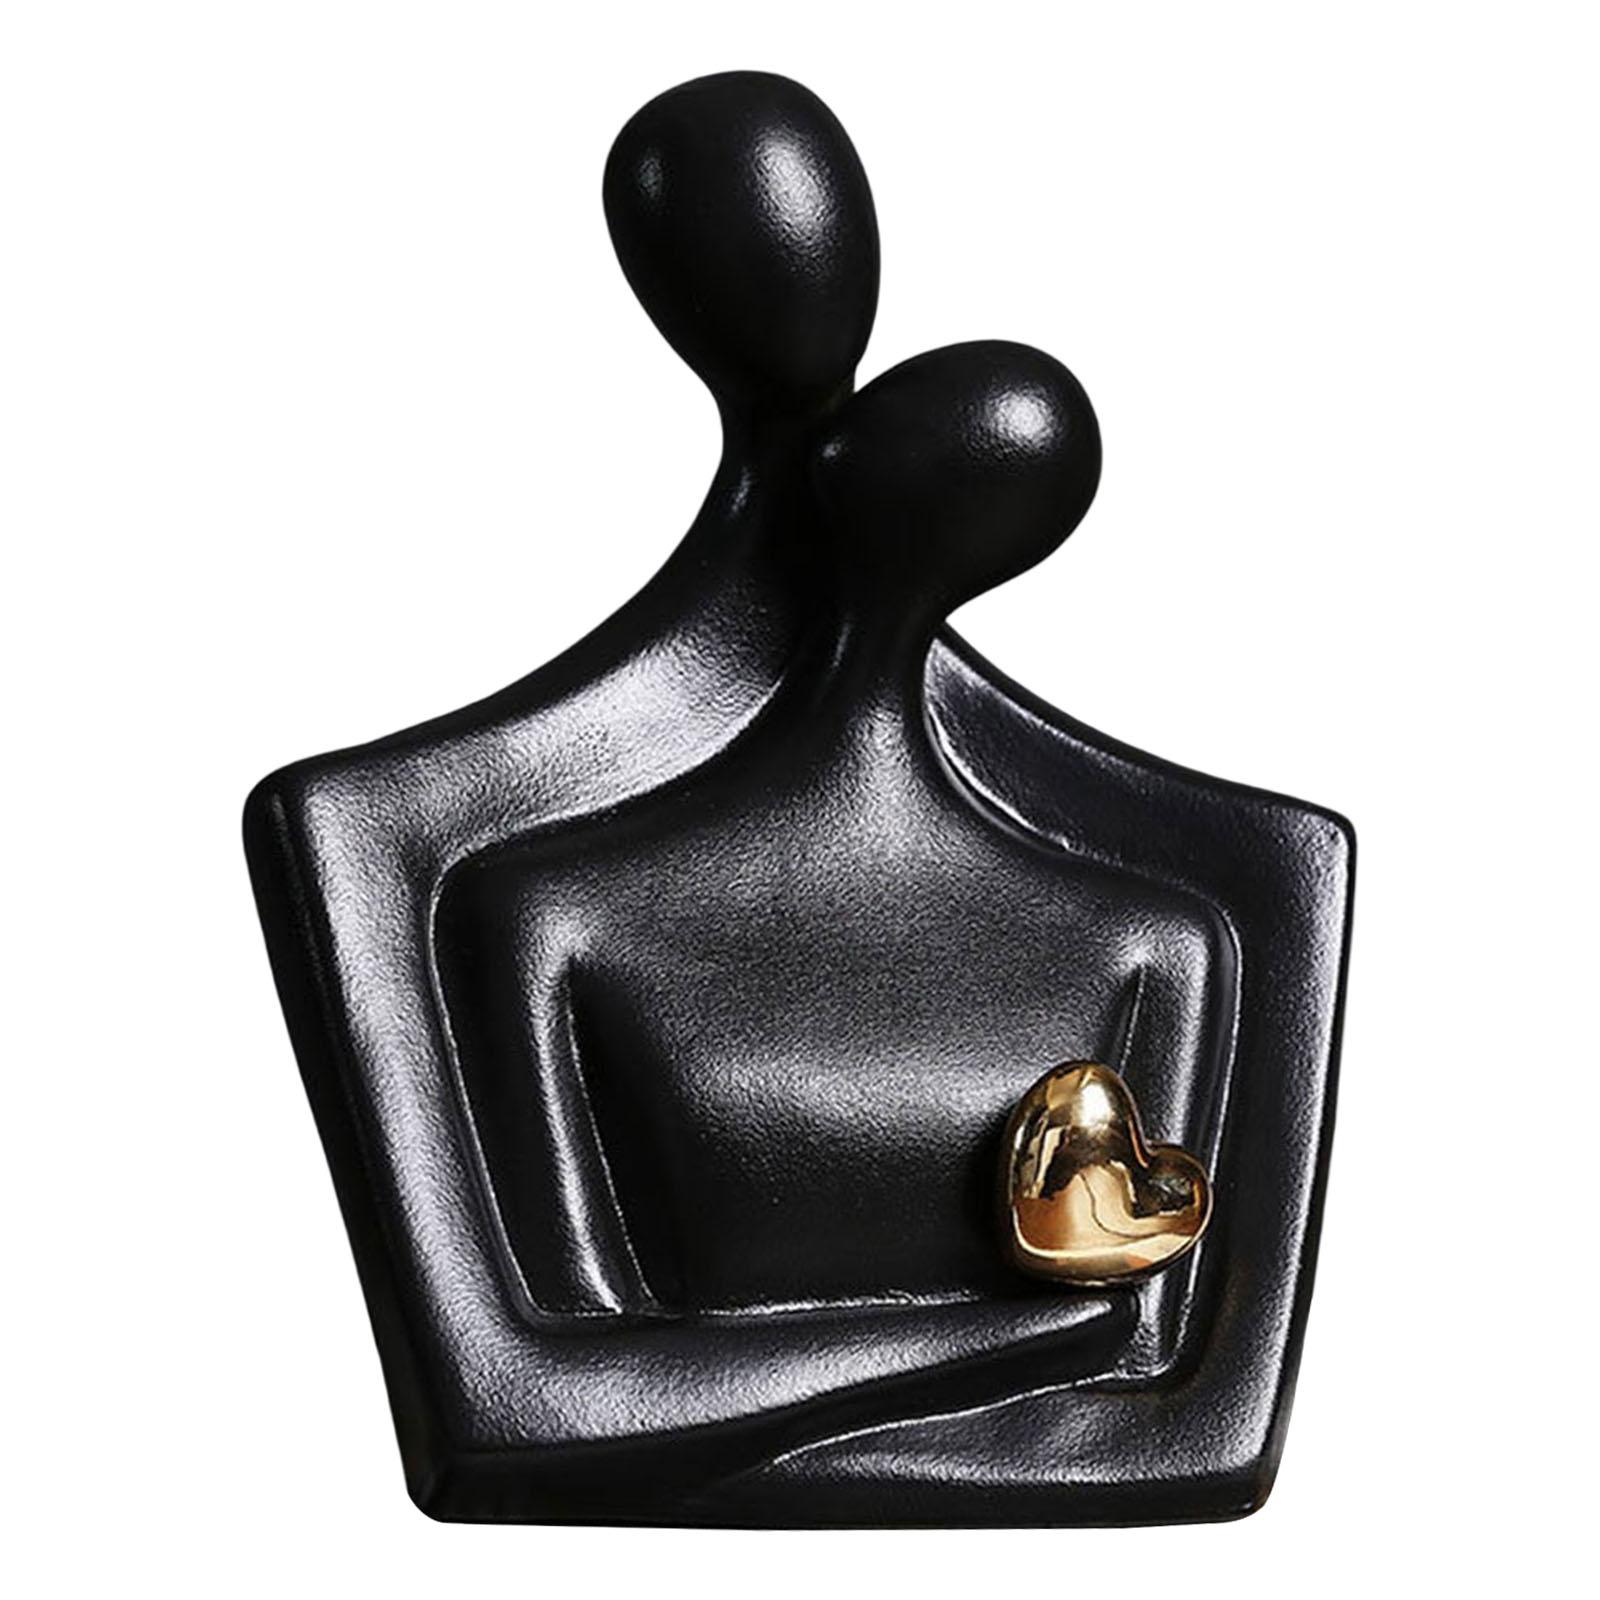 Abstract Lover Statue Nordic creative Crafts for Cabinet Desk Office Hug Black